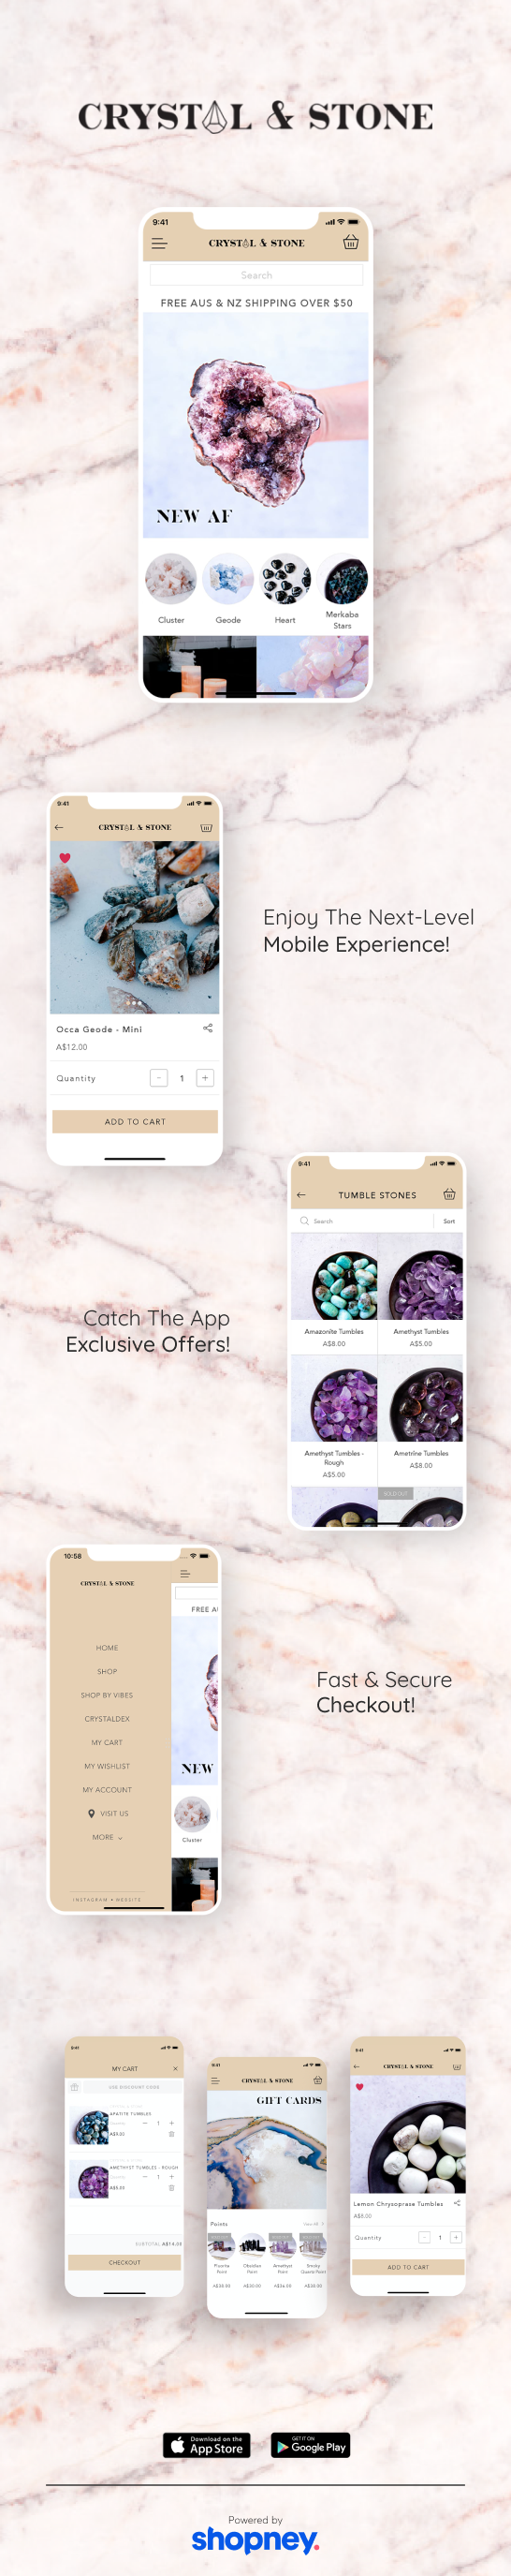 the mobile app design of Crystal & Stone app